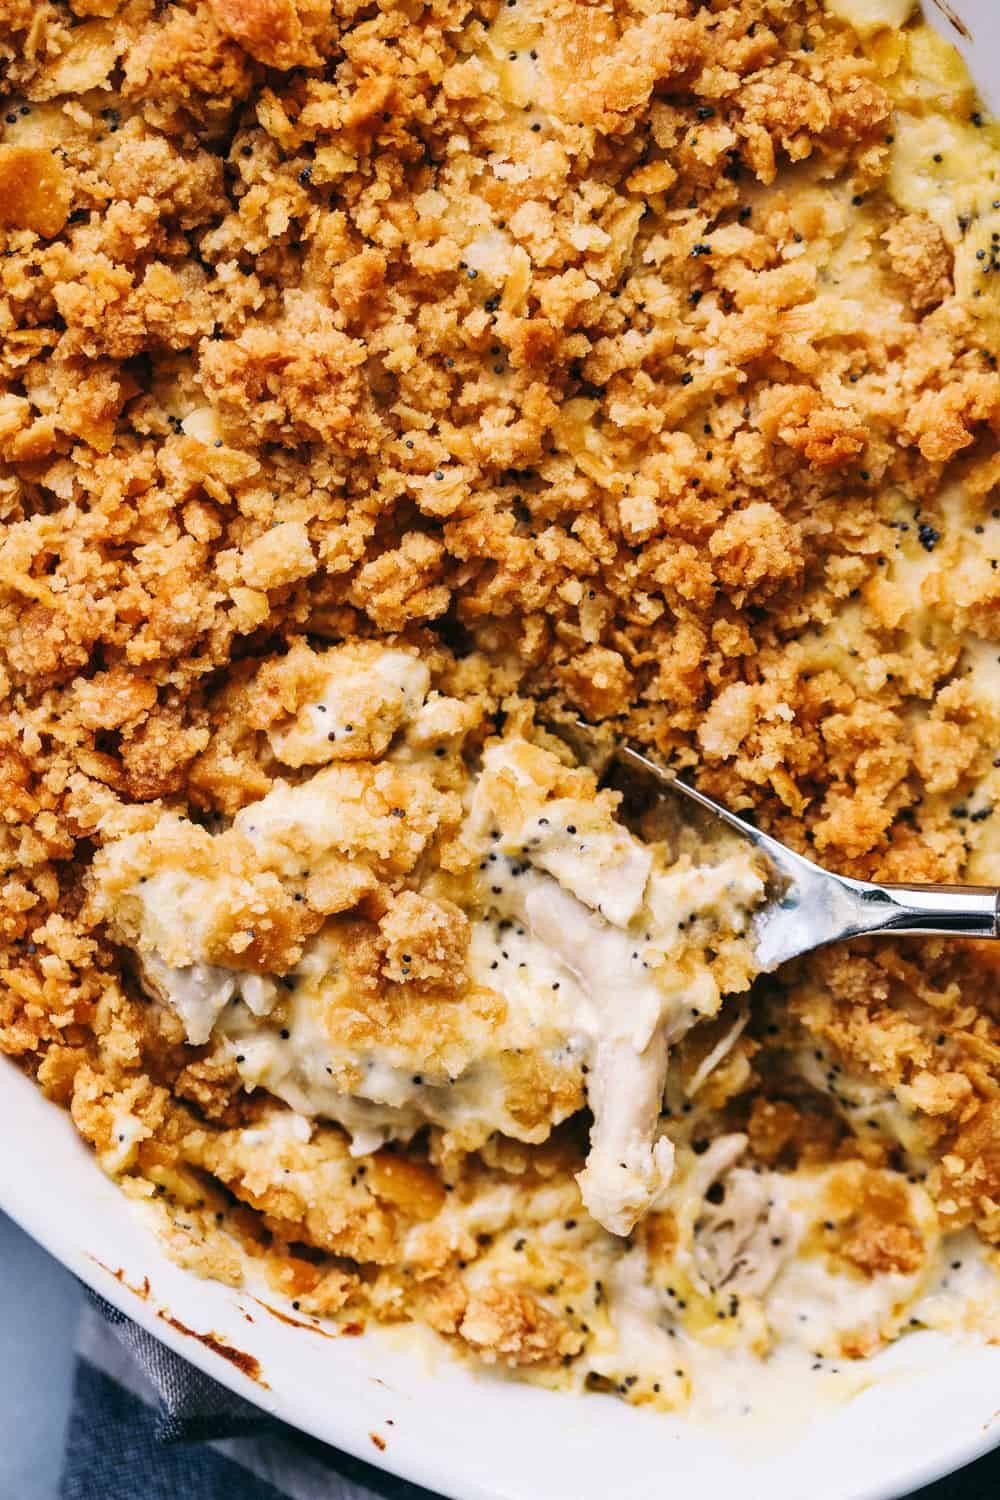 Poppy Seed Chicken Casserole With Rice
 The Very Best Poppy Seed Chicken Casserole Lose Belly Fat